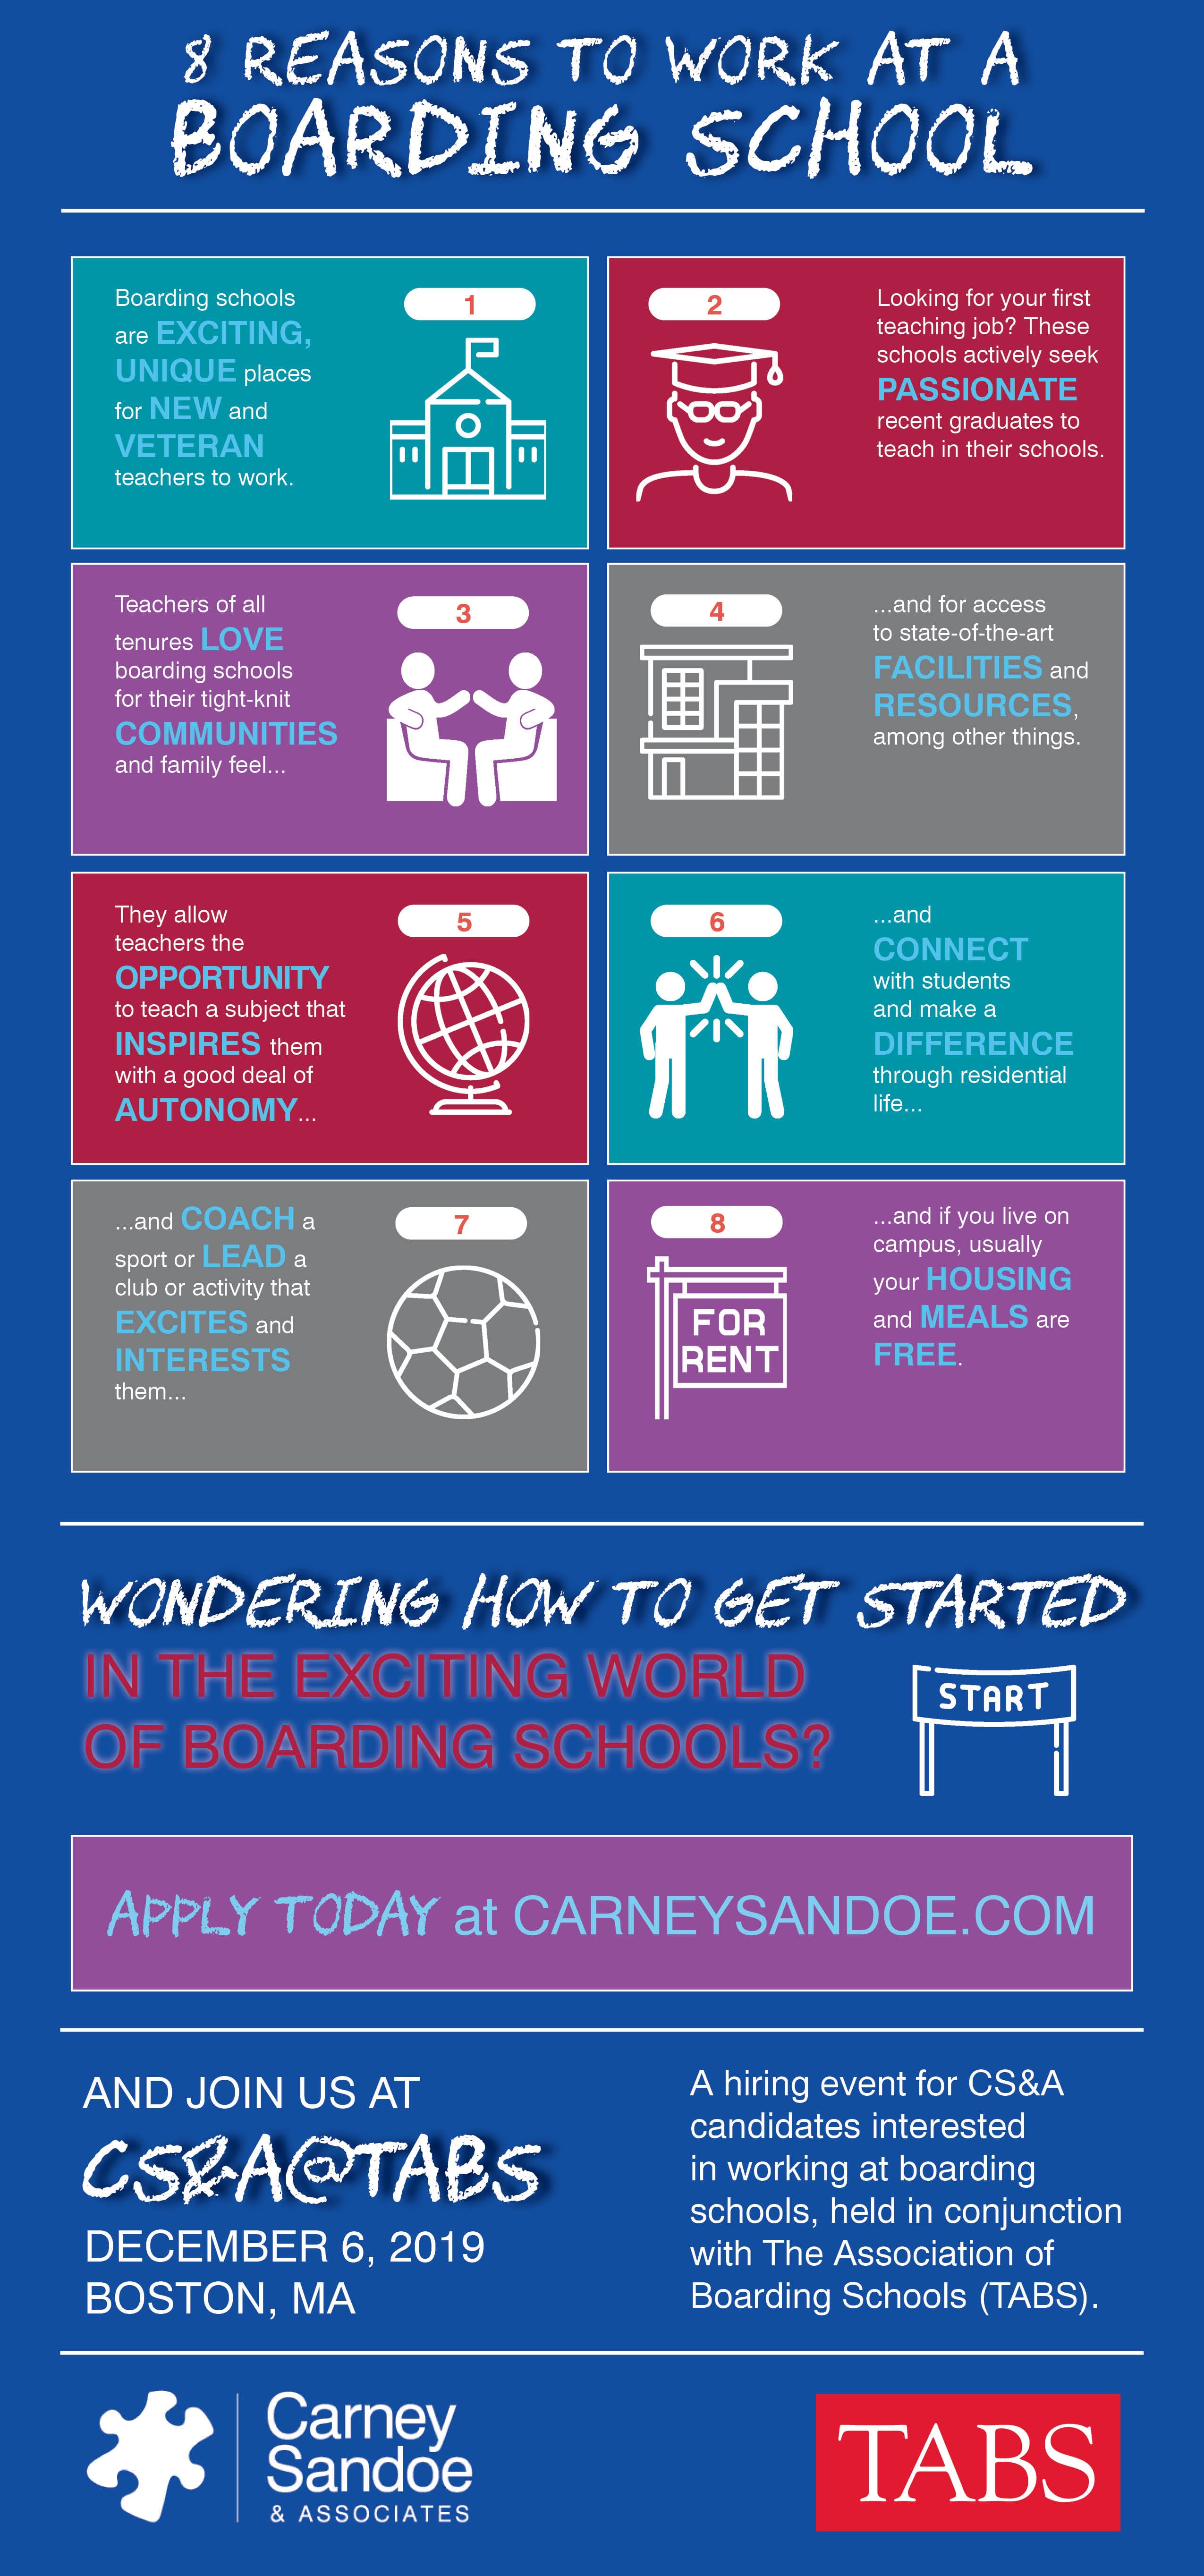 8 reasons to work at a boarding school